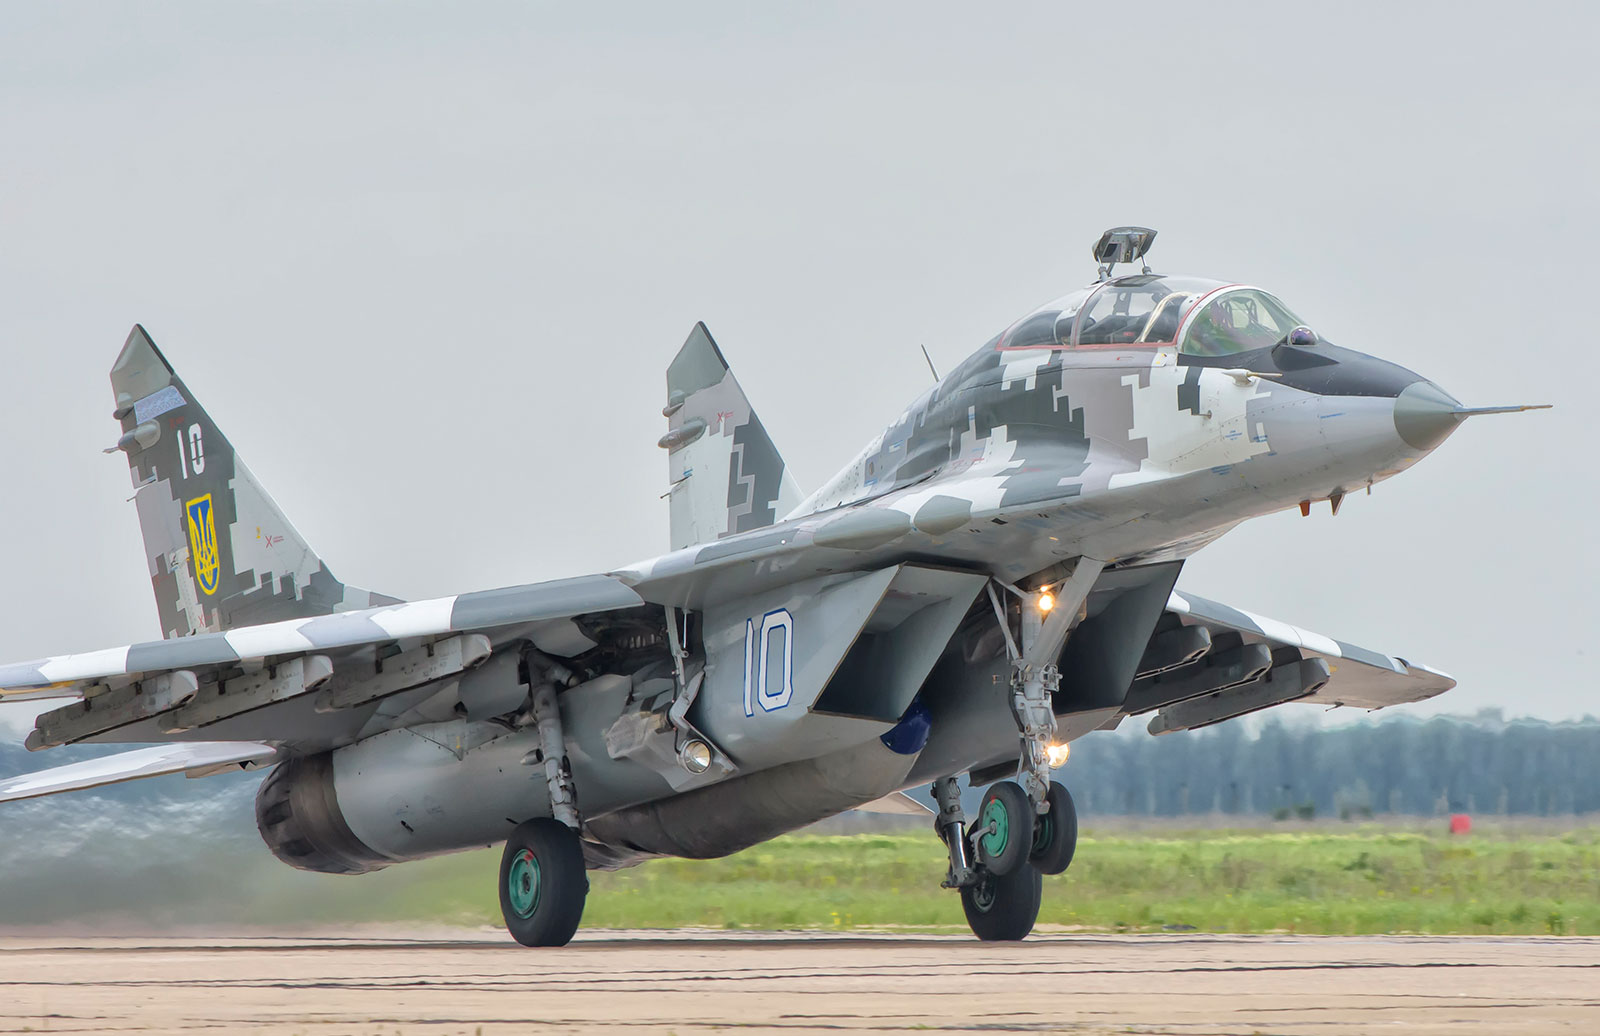 A Ukrainian Air Force Mig-29 takes off from Mykolaiv Air Base for a training mission in Ukraine in 2016. Ukrainian President Volodymyr Zelensky has repeatedly asked other countries for Soviet-era Mig-29 Fulcrum fighter jets, which Ukrainian pilots already know how to fly. 